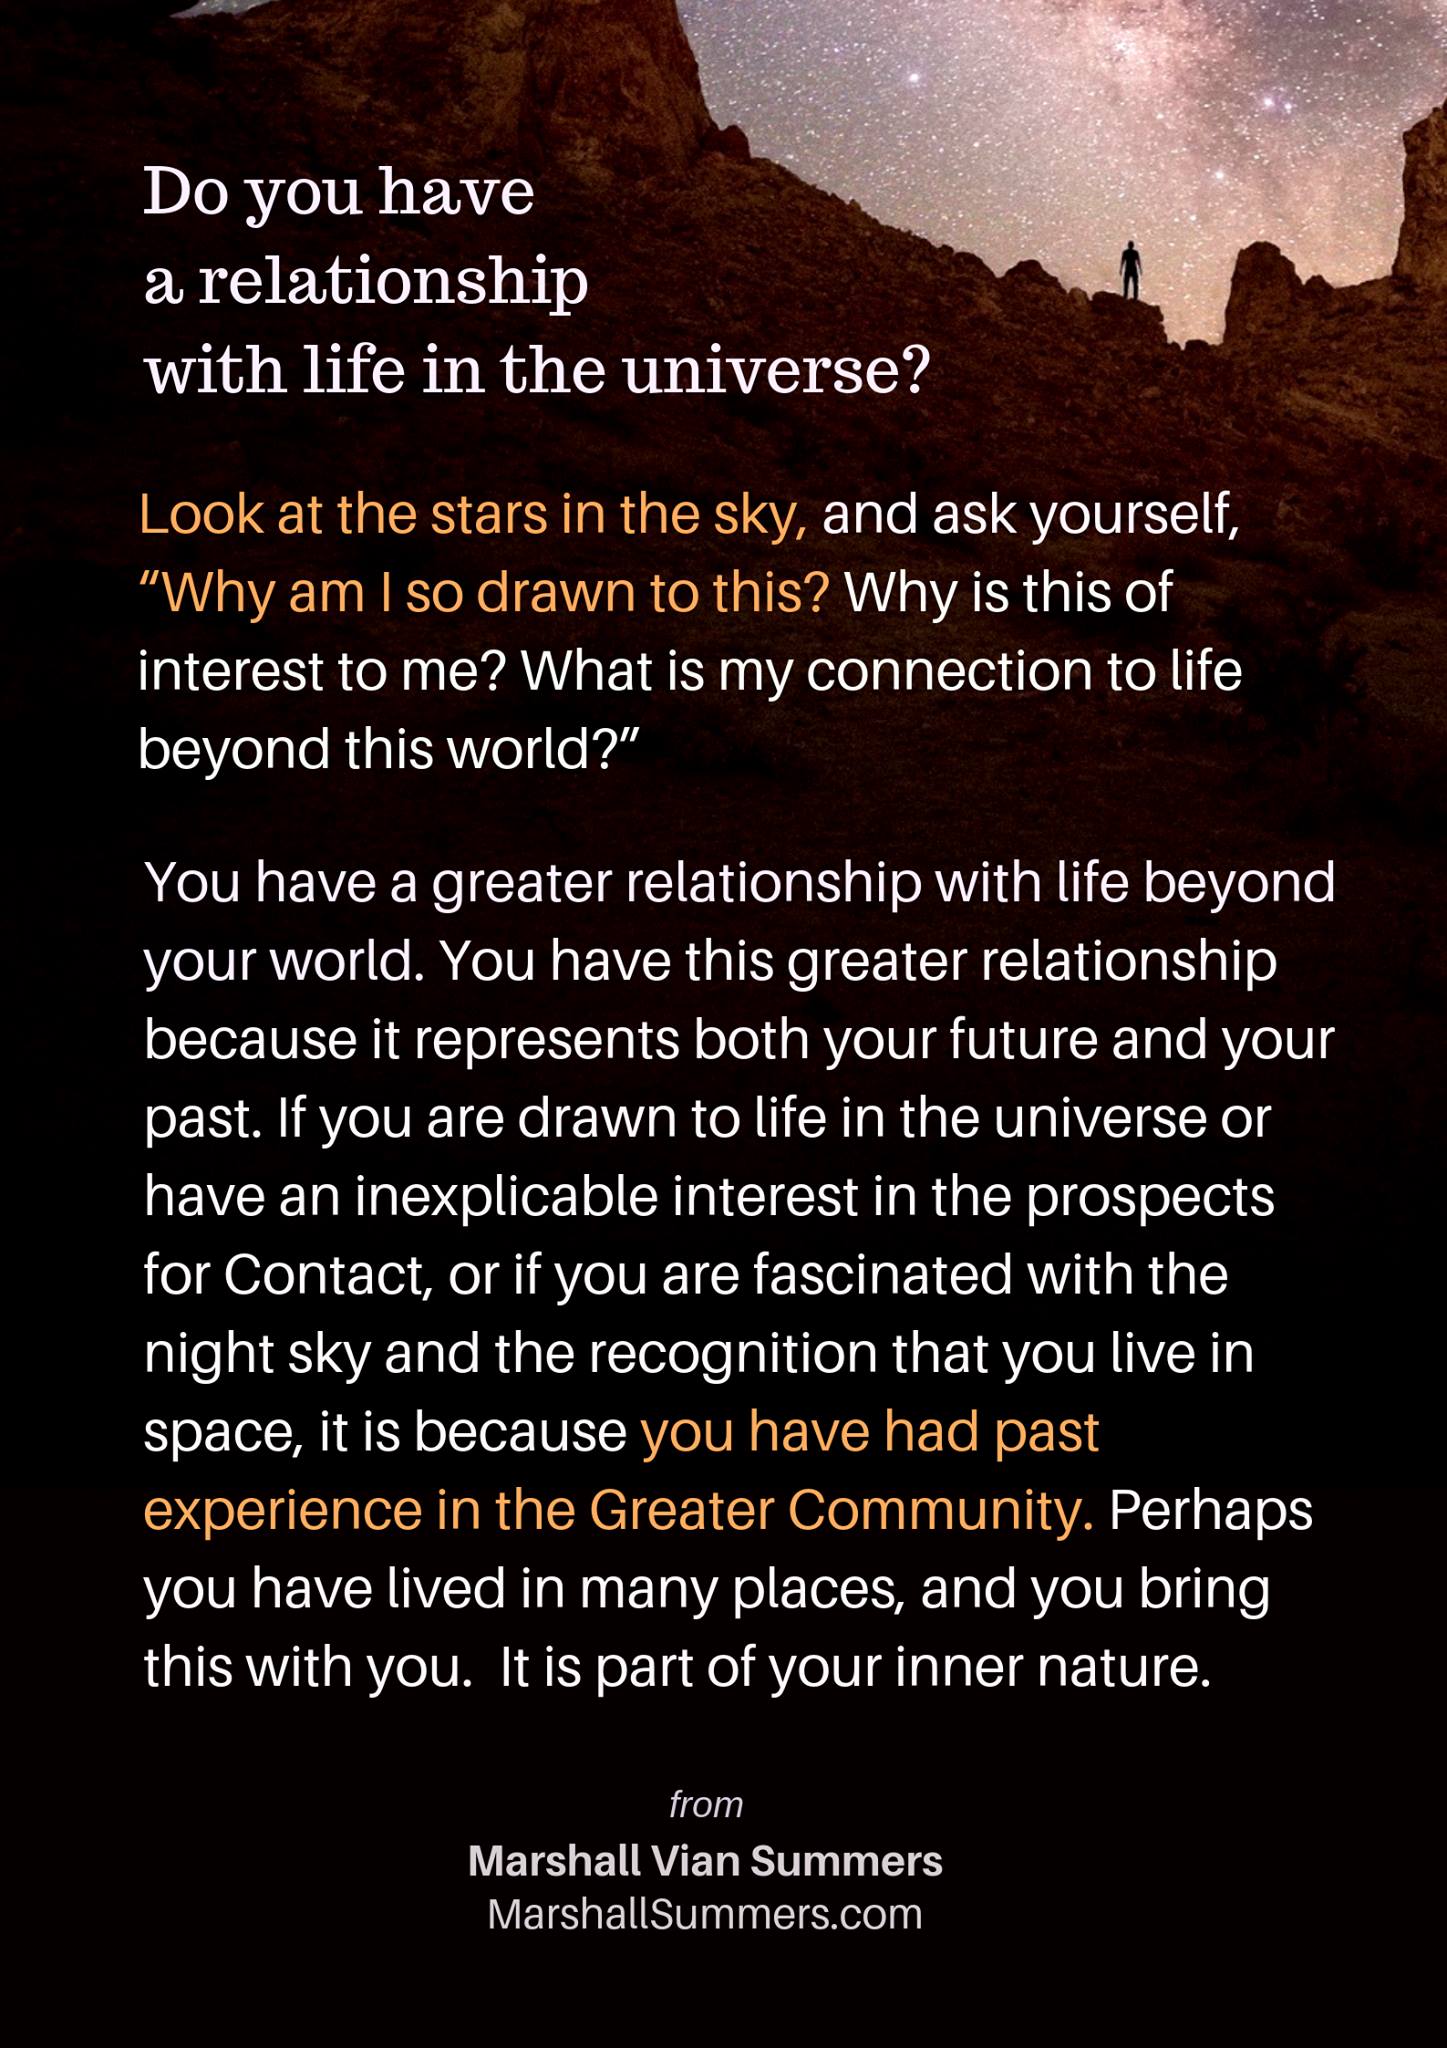 Do you have a relationship with life in the universe?